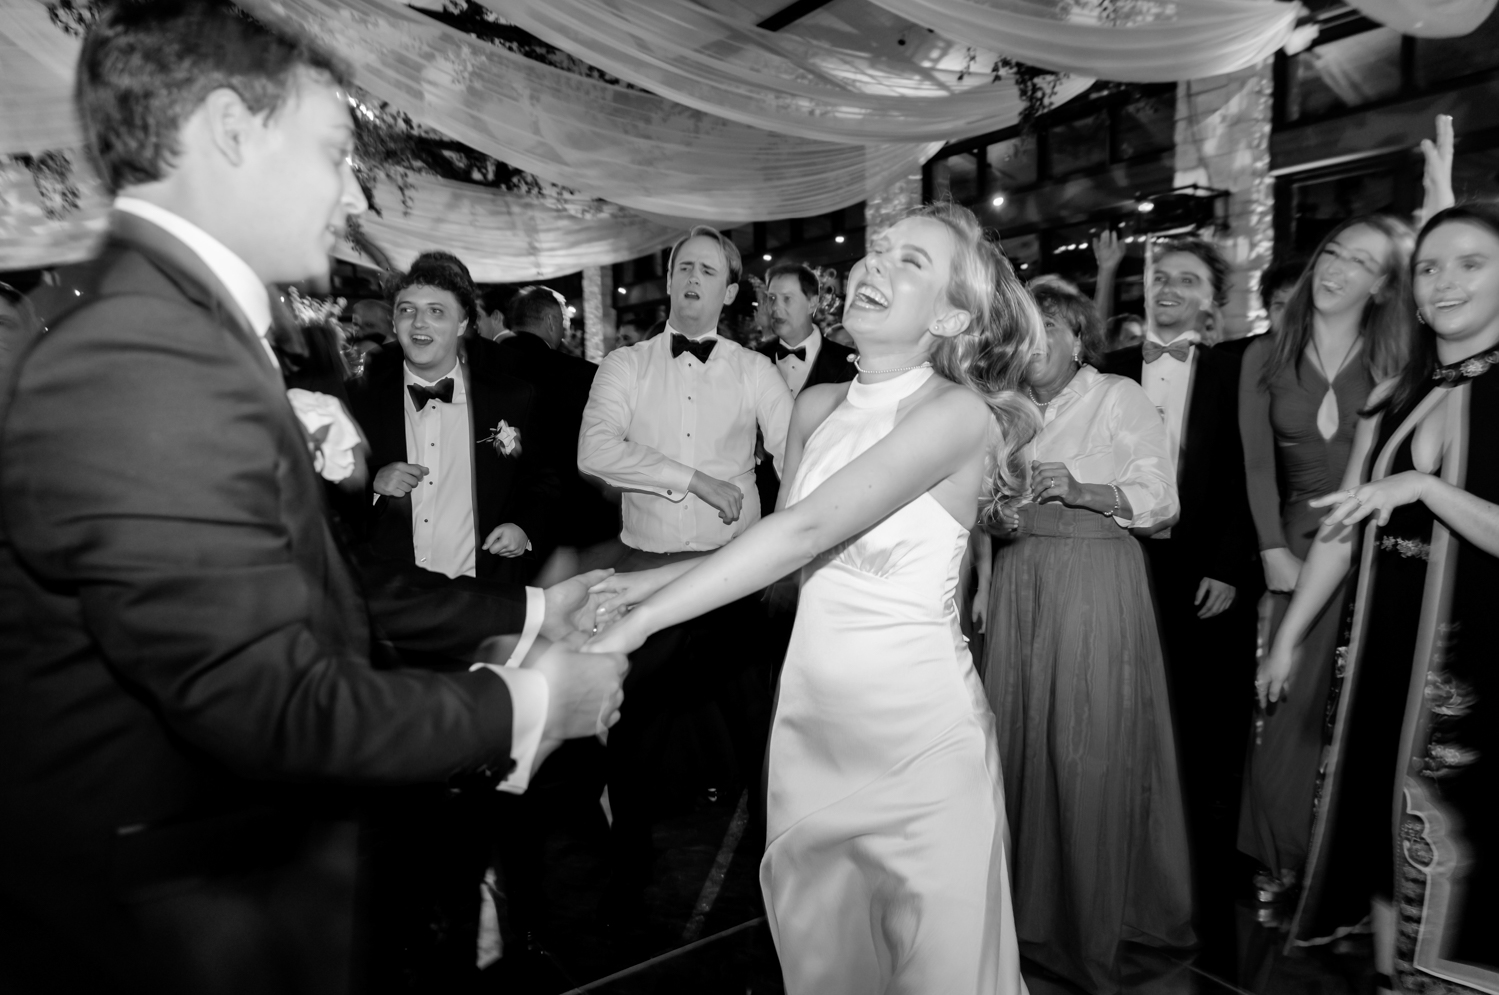 The bride smiles and laughs, dancing with her husband and their guests.